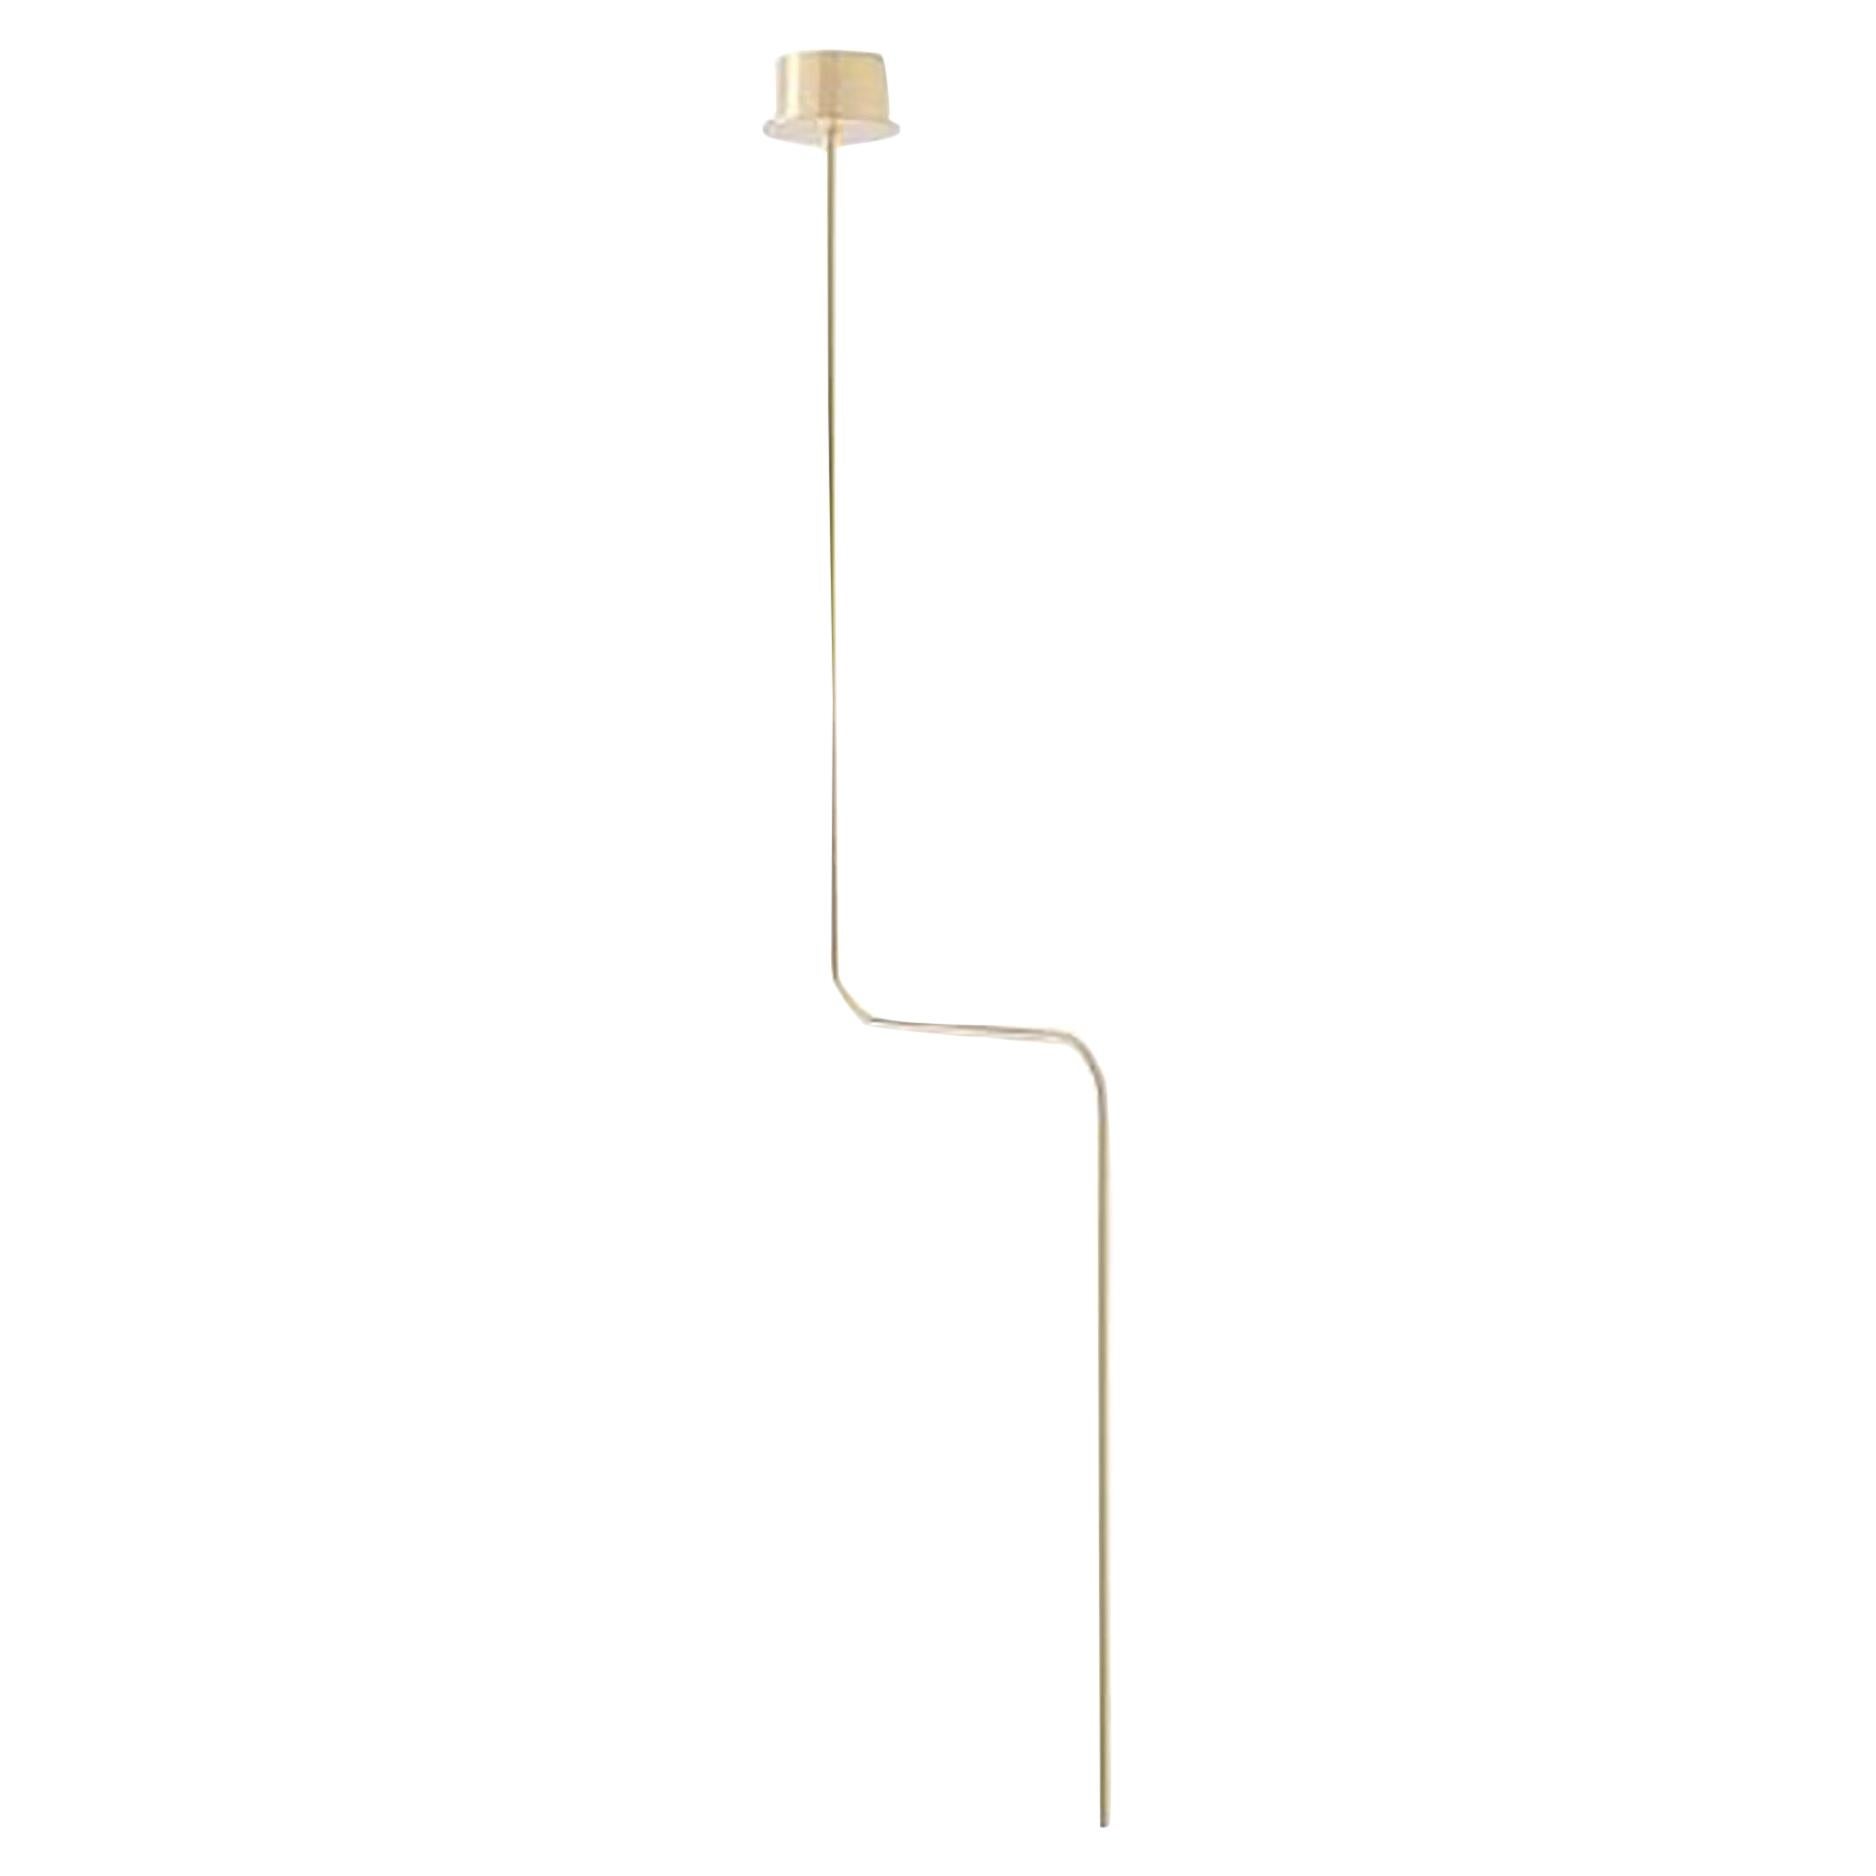 Gold Contemporary Ceiling Lamp in Tubular Brass, LED Lamp Type